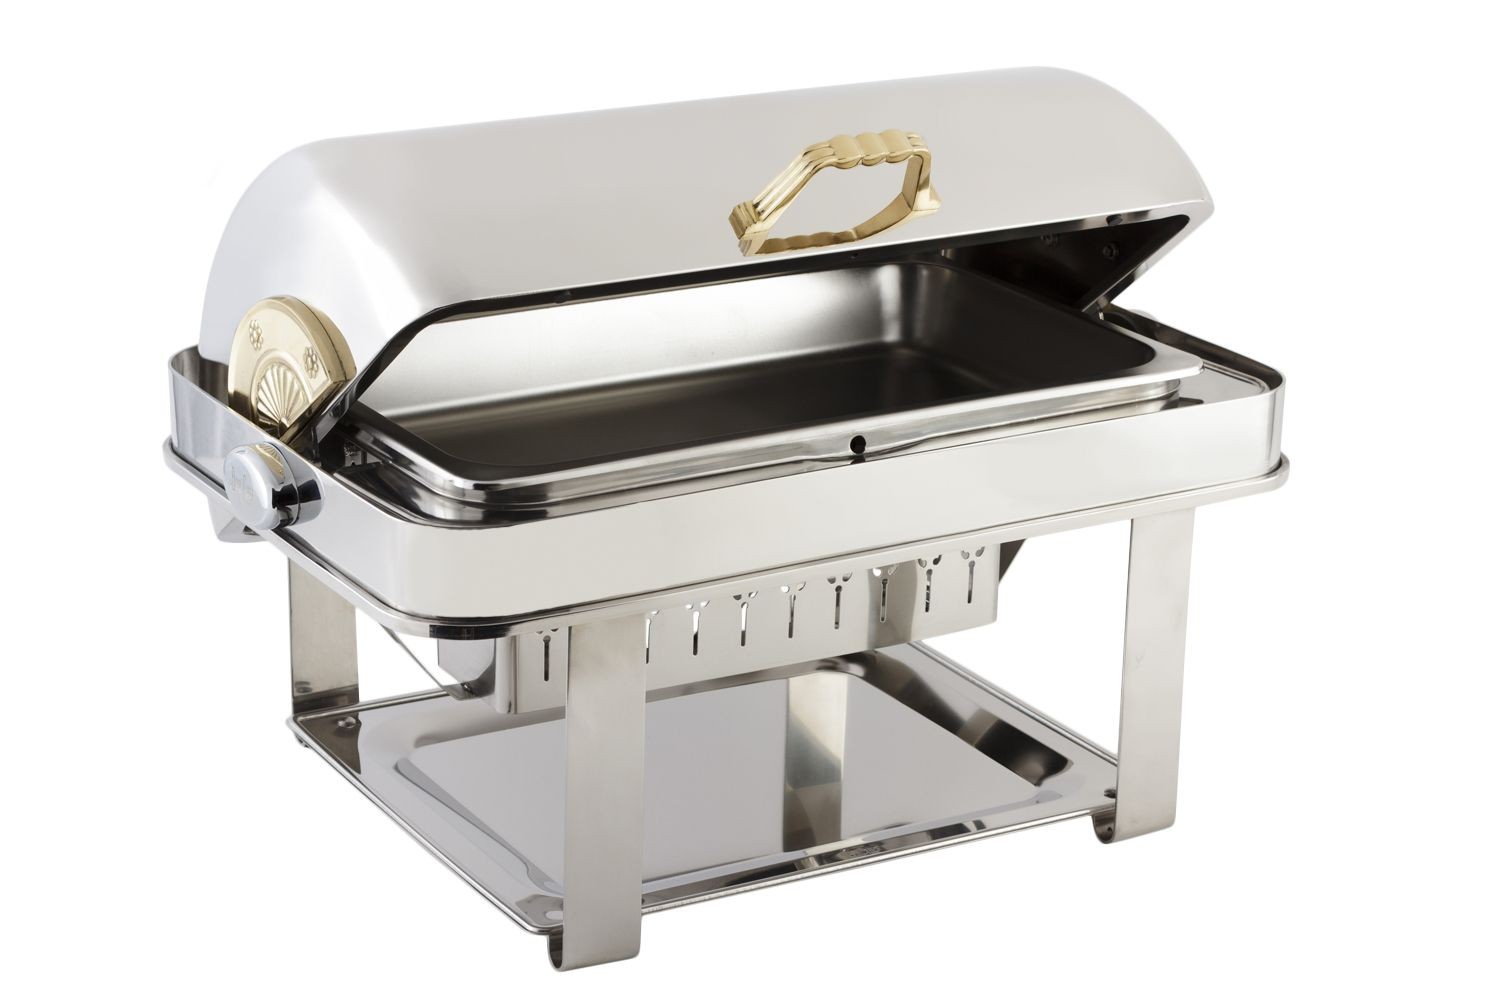 Bon Chef 12004 Elite Dripless Rectangular Chafer with Brass Accents, 8 Qt.